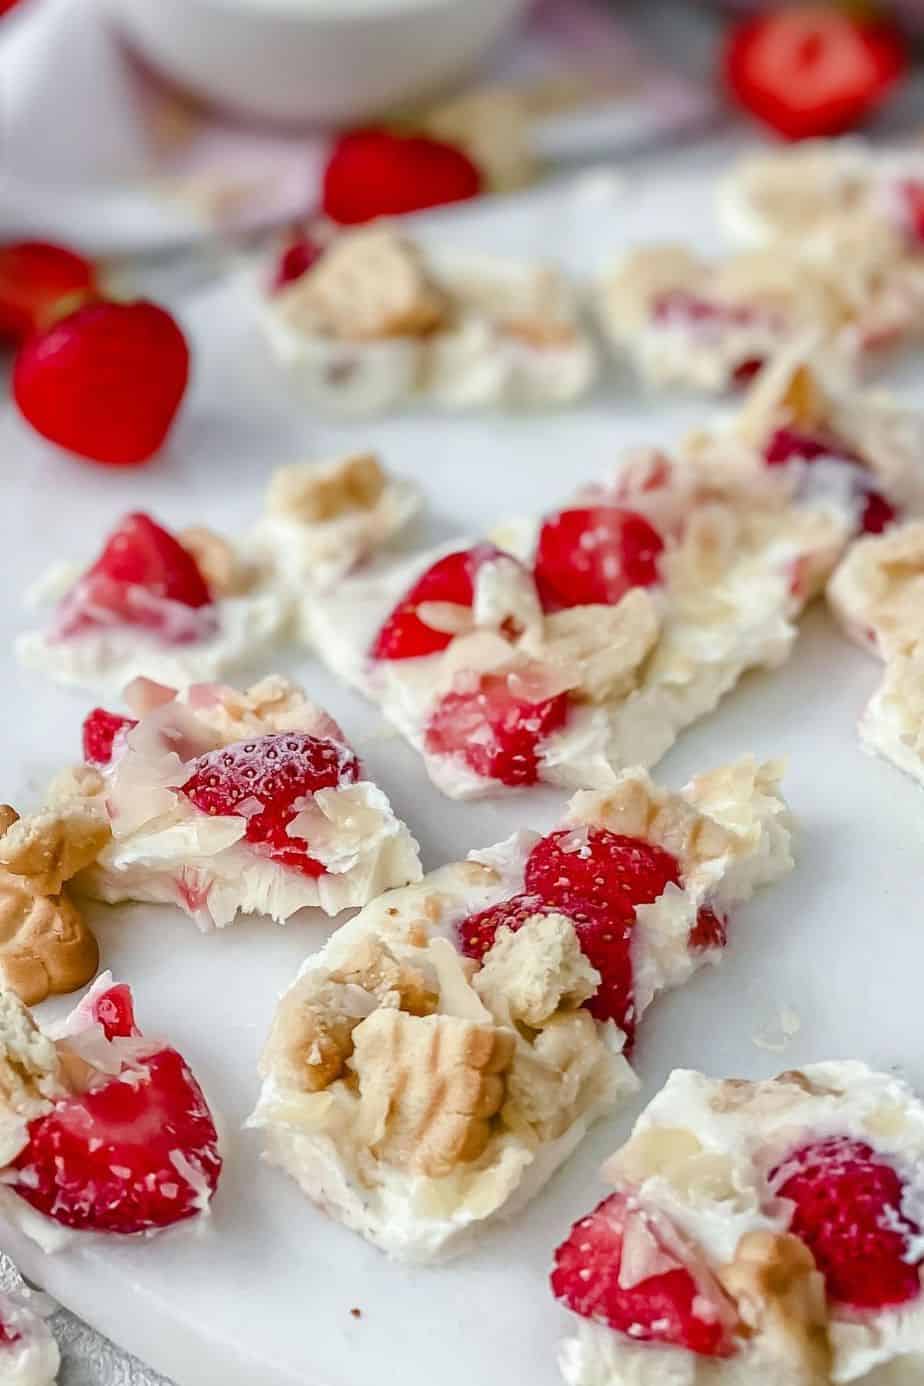 Frozen yogurt bark is a healthy snack on it’s own, add some strawberries, cookies and almond flakes and it becomes a tasty dessert. It takes 5 minutes to make, 5 ingredients and it’s a great after school snack for kids and adults alike! - The Yummy Bowl